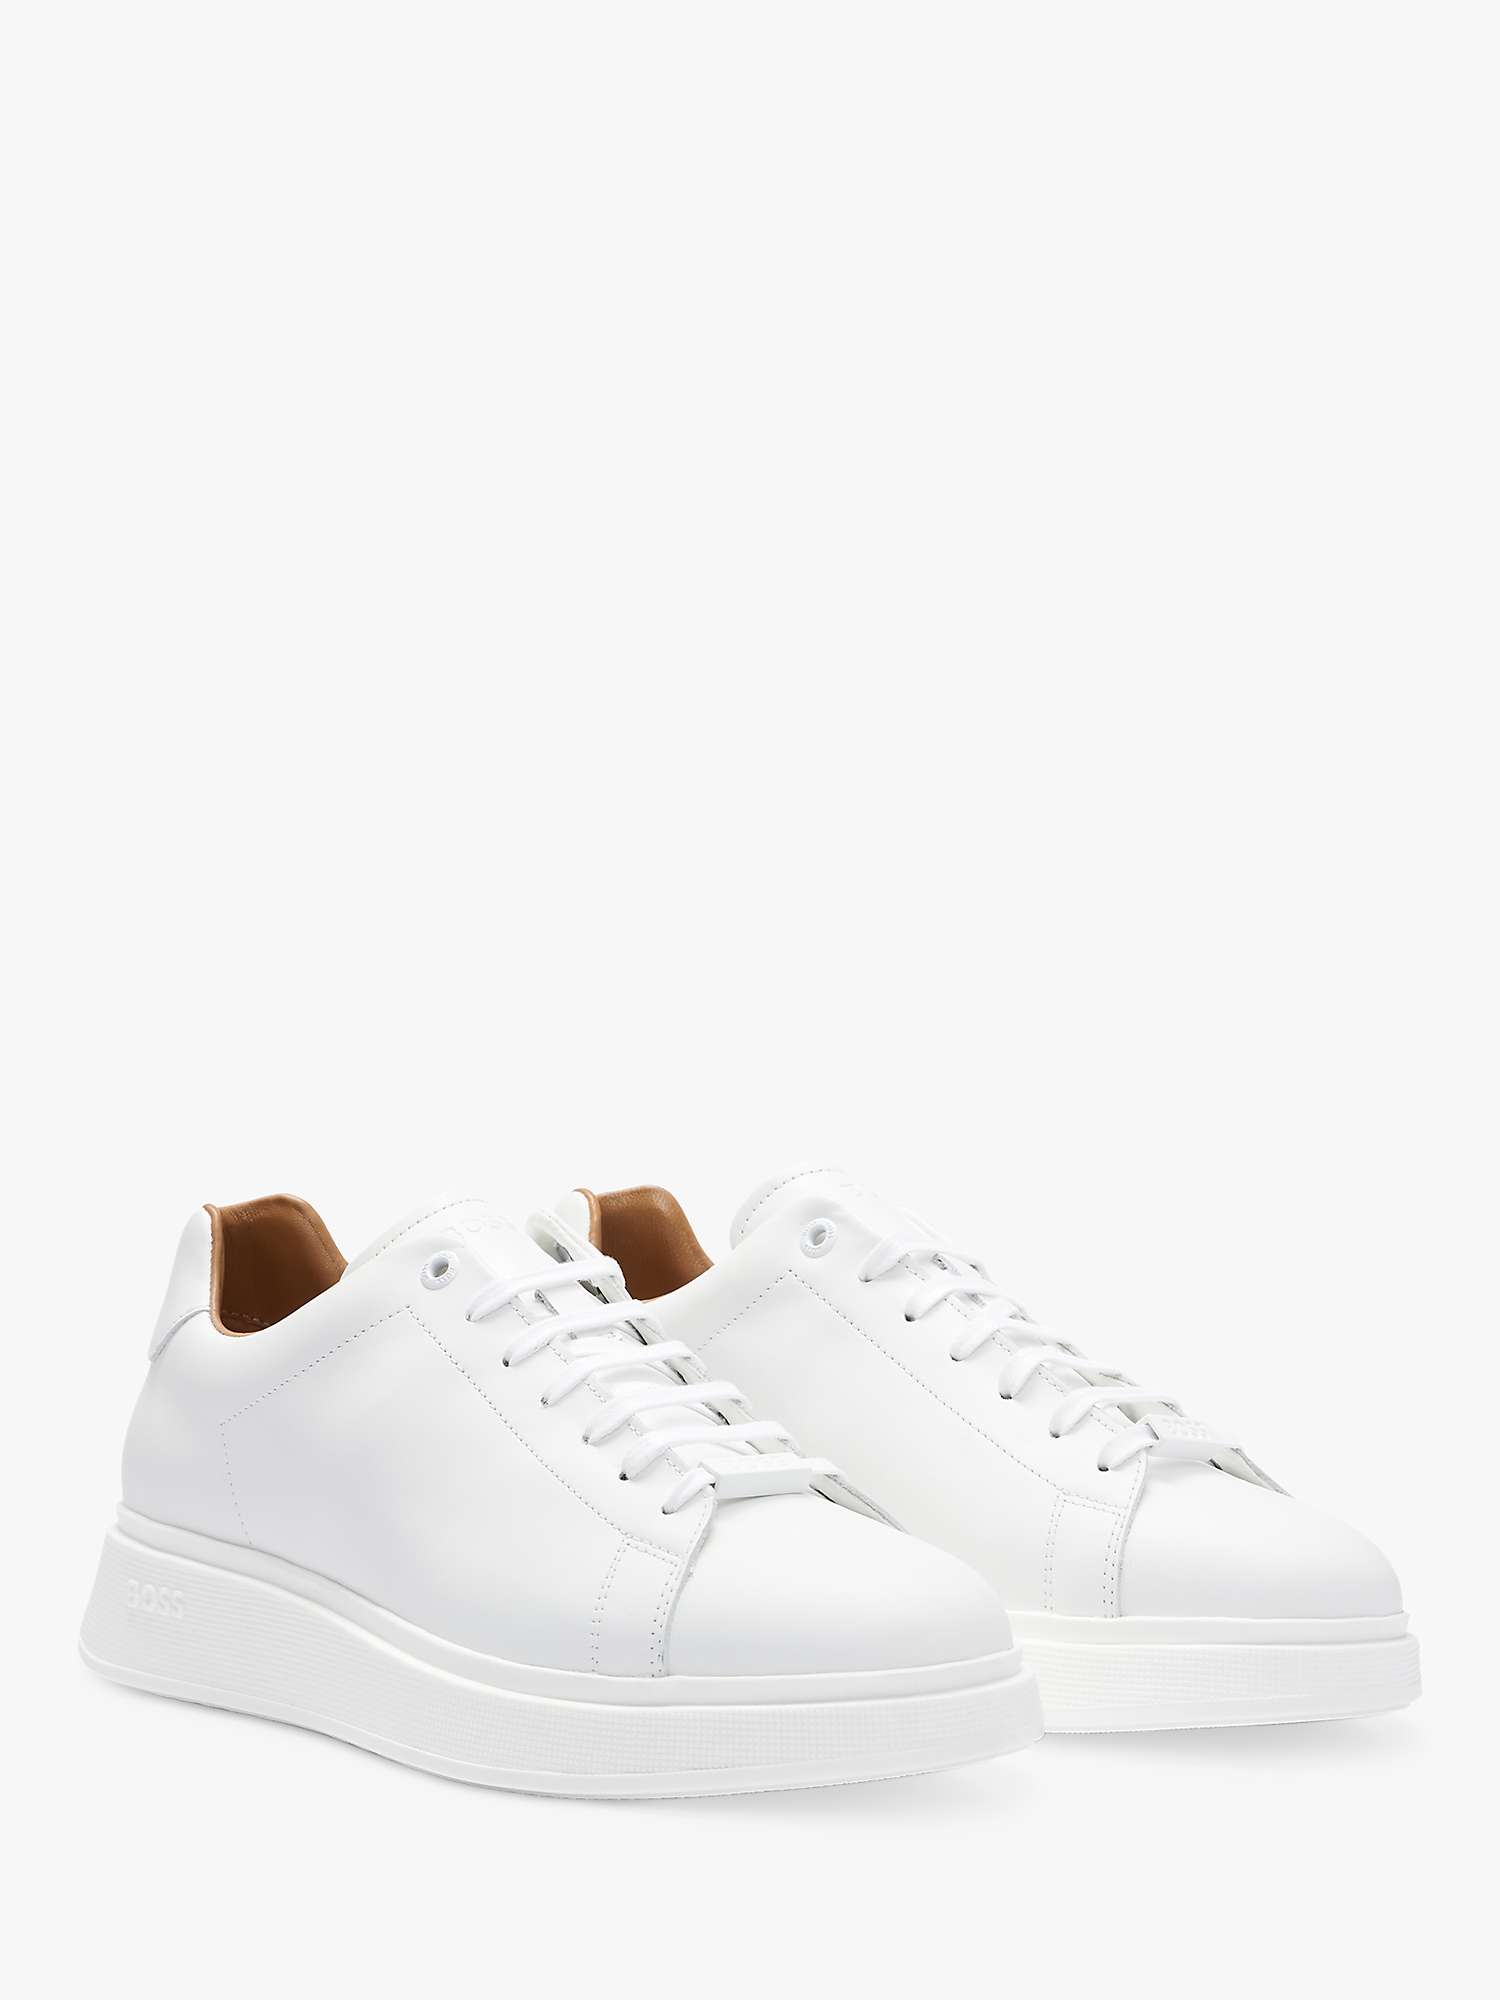 Buy HUGO BOSS Bulton 001 Lace Up Trainers Online at johnlewis.com